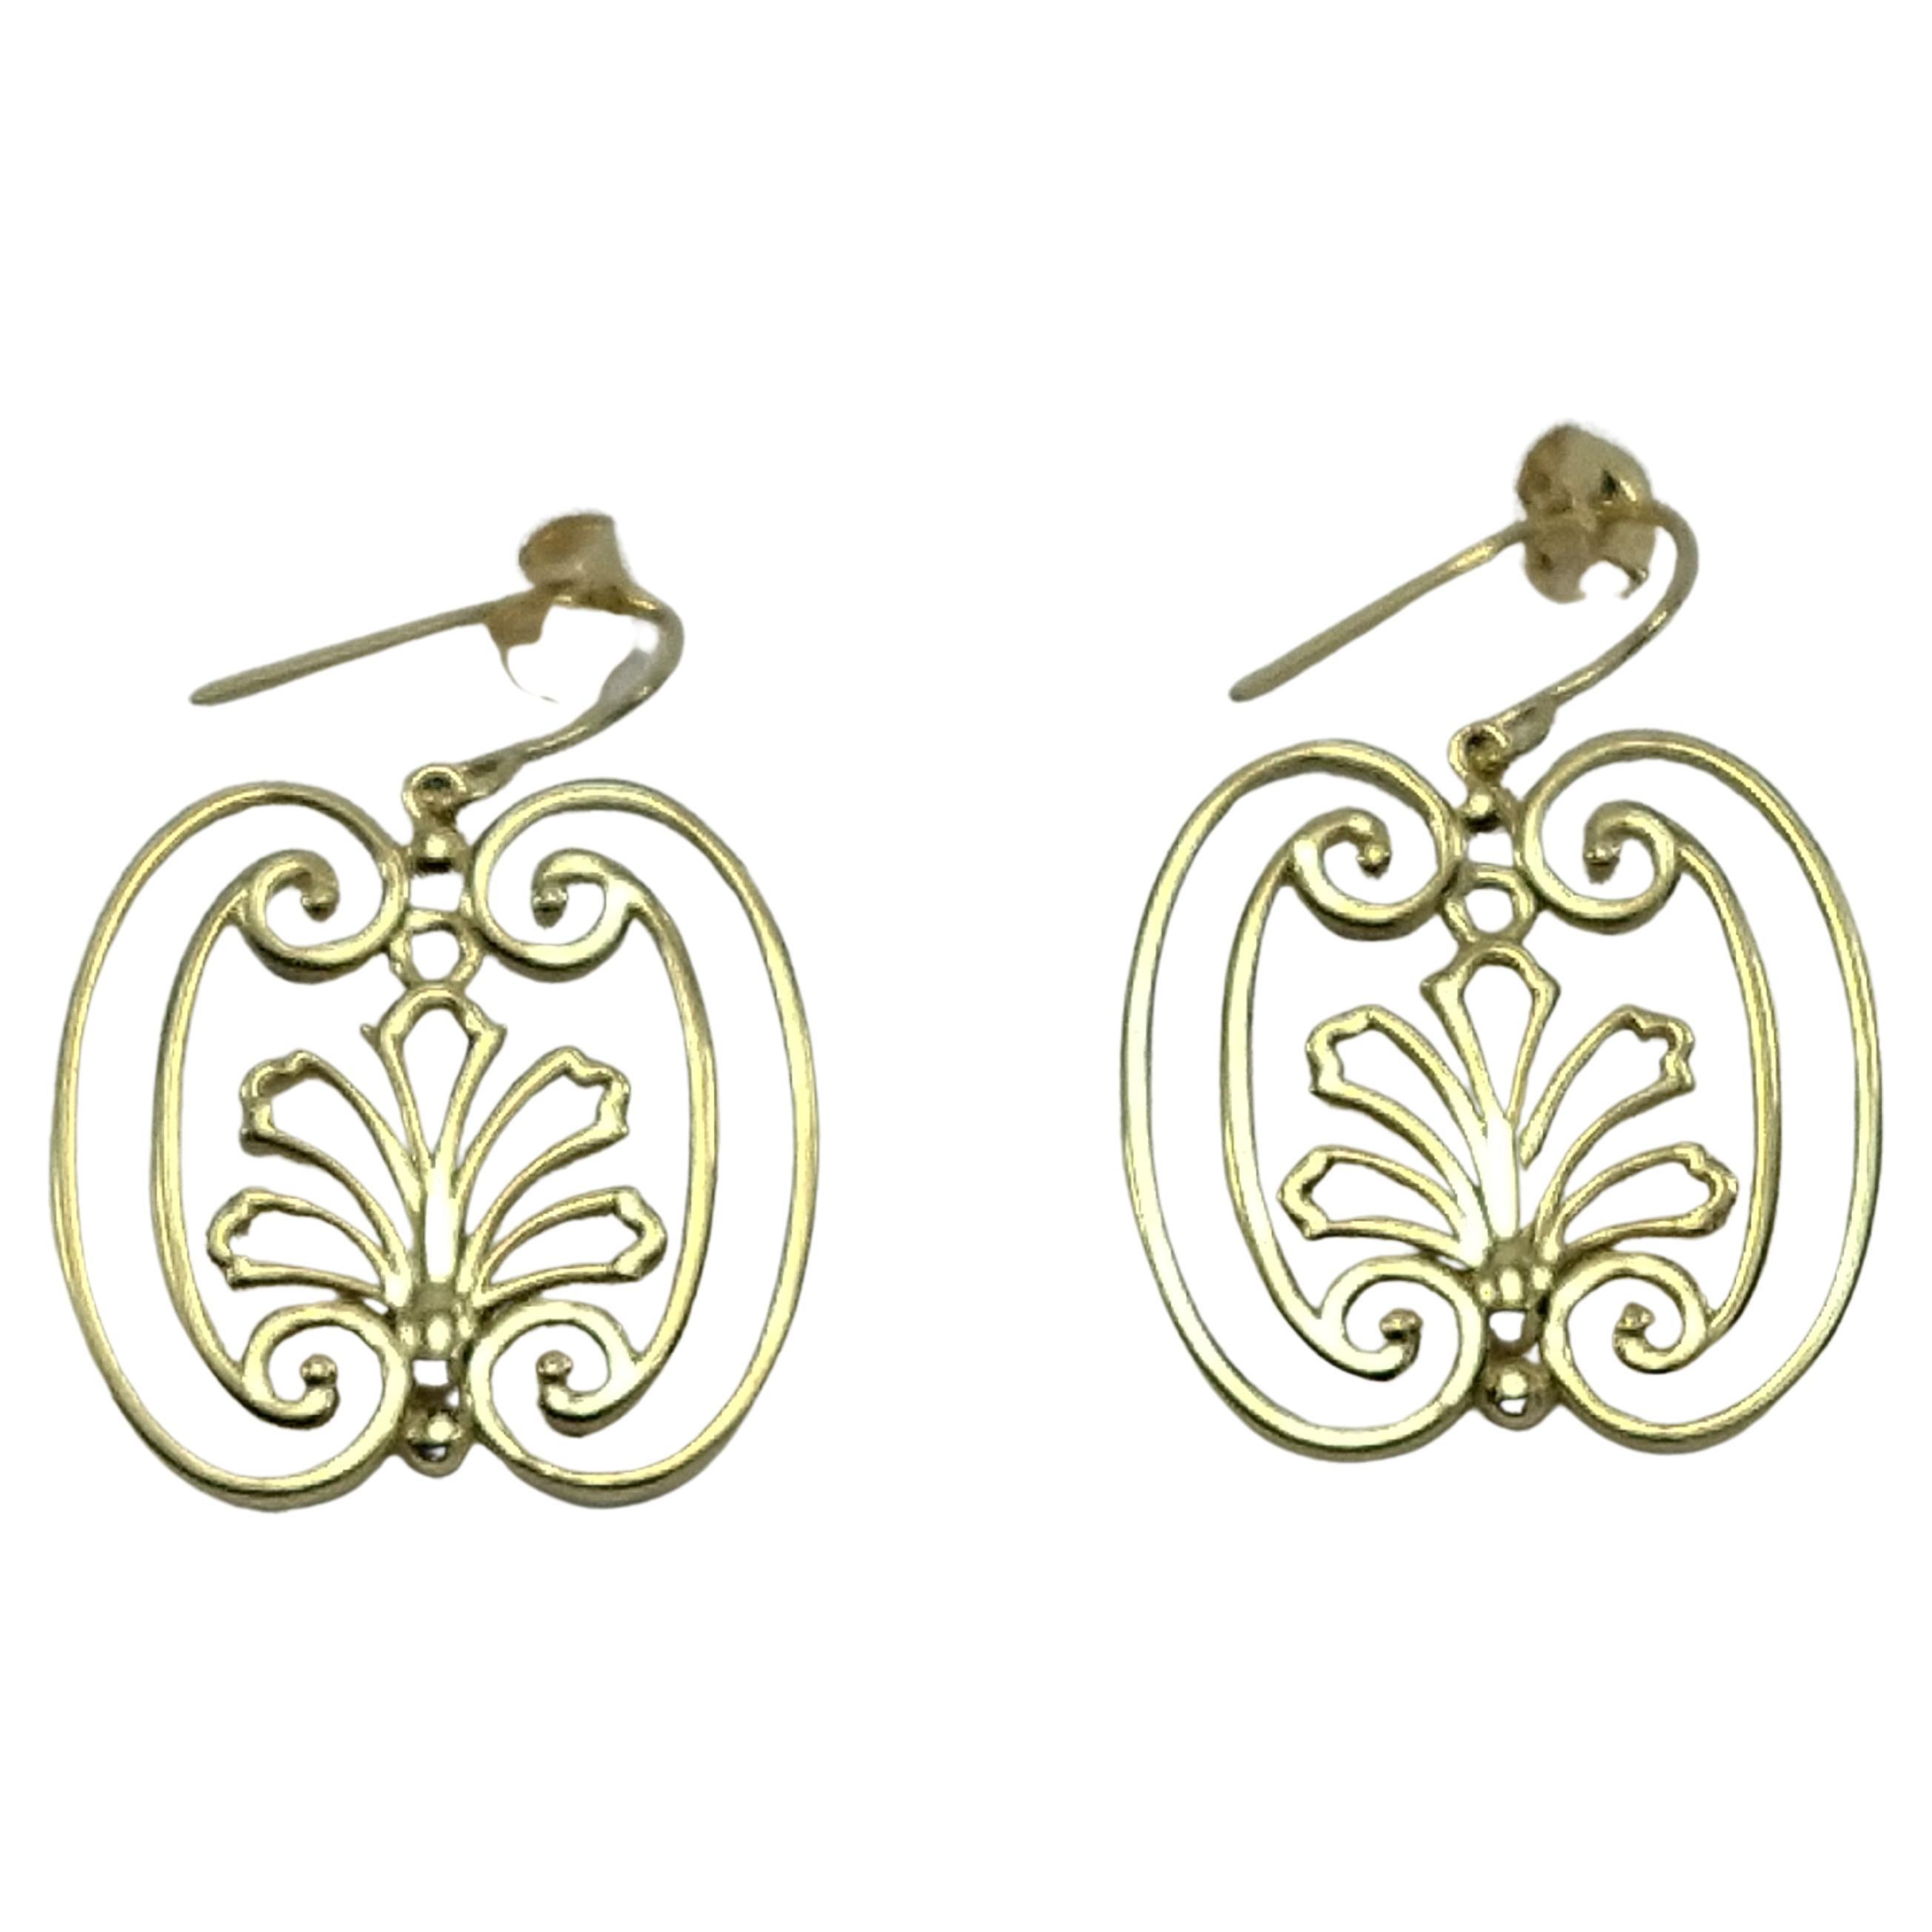 18 Karat Yellow Gold French Gate Dangle Earrings , This is a series of Gate Earrings from my travels and inspirations in Europe. Photographs of iron and bronze gates, fences,and windows. 
I am taking the old lost art of elegant decorative hand